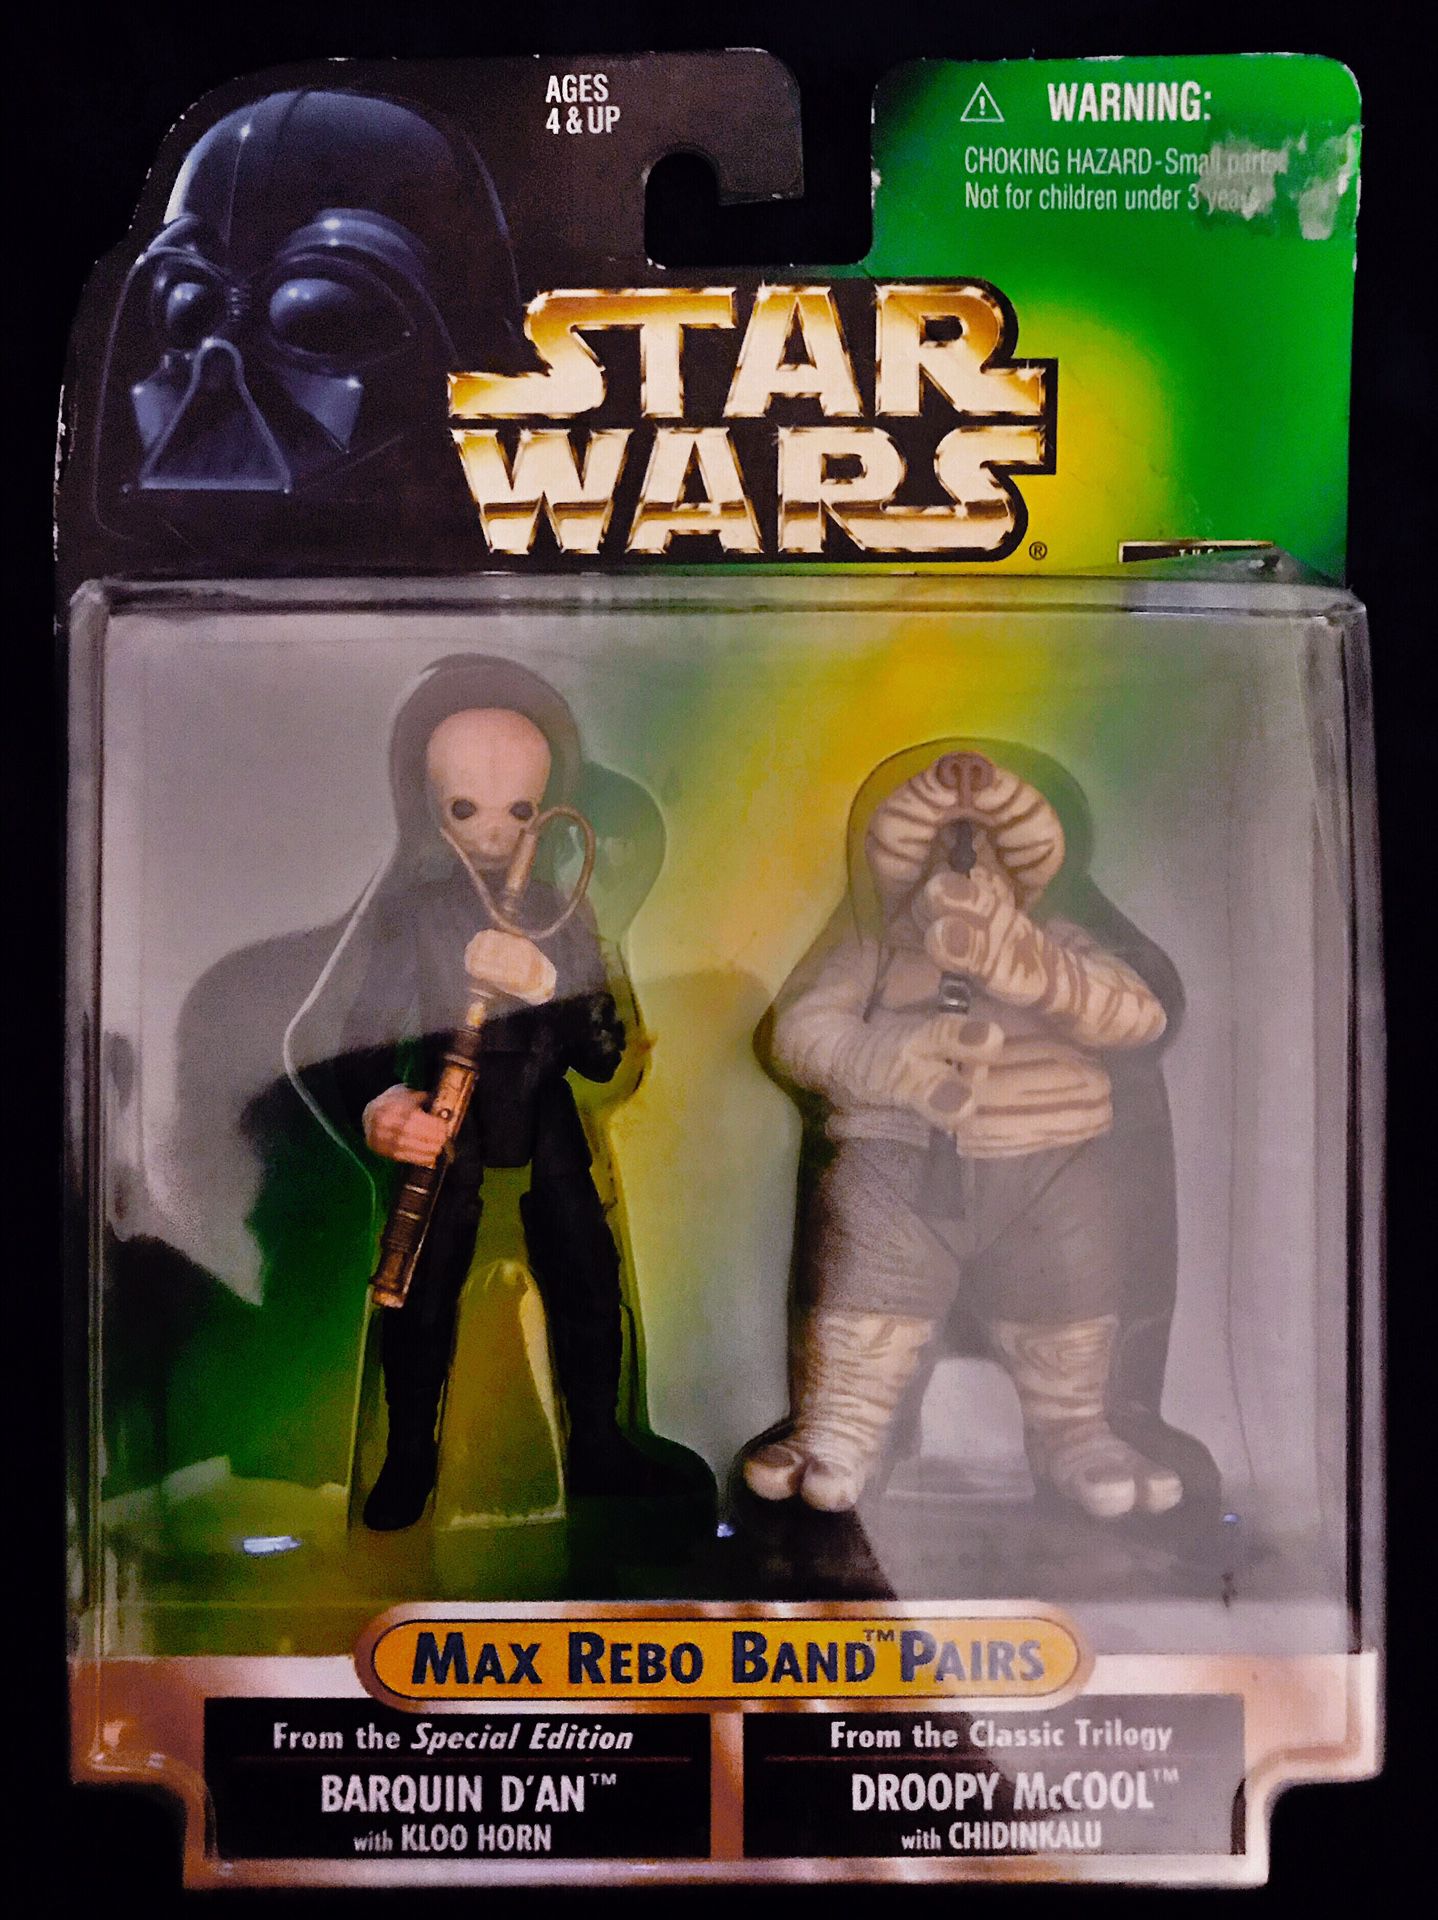 Hasbro/Kenner® 1998 Collection Star Wars® Max Rebo Band™ Barquin D’an™ & Droopy McCool™ Action Figure Pairs